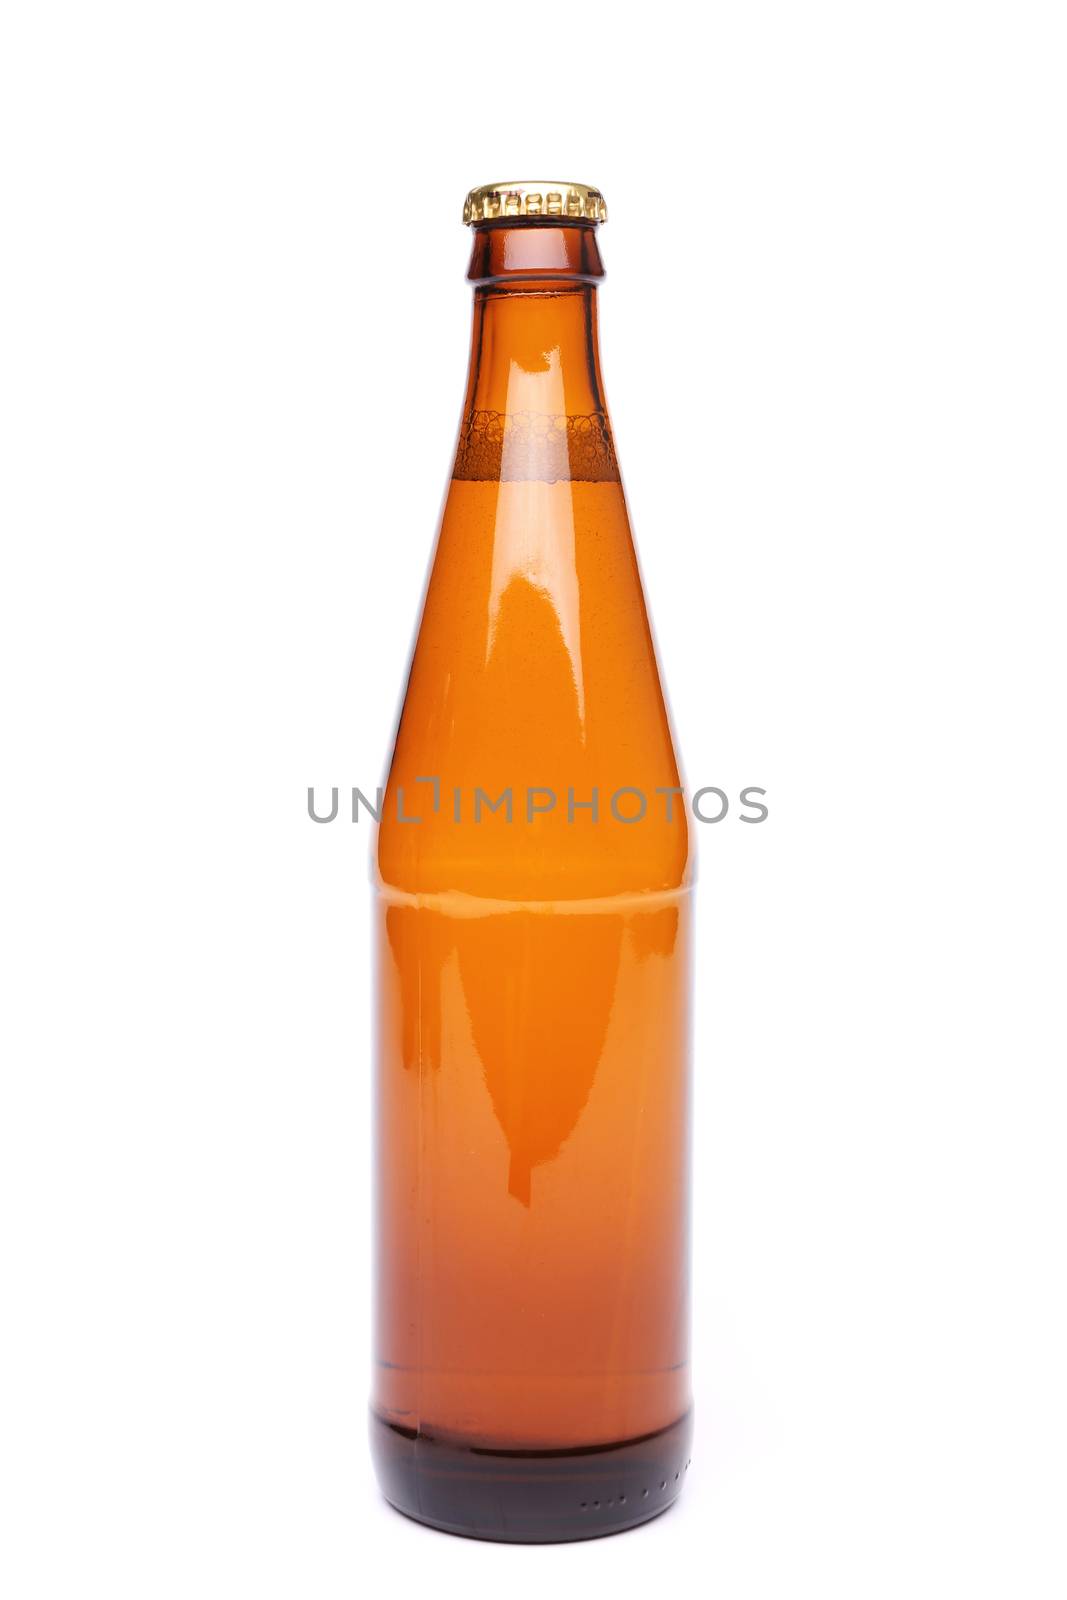 A brown bottle with drink on white background.